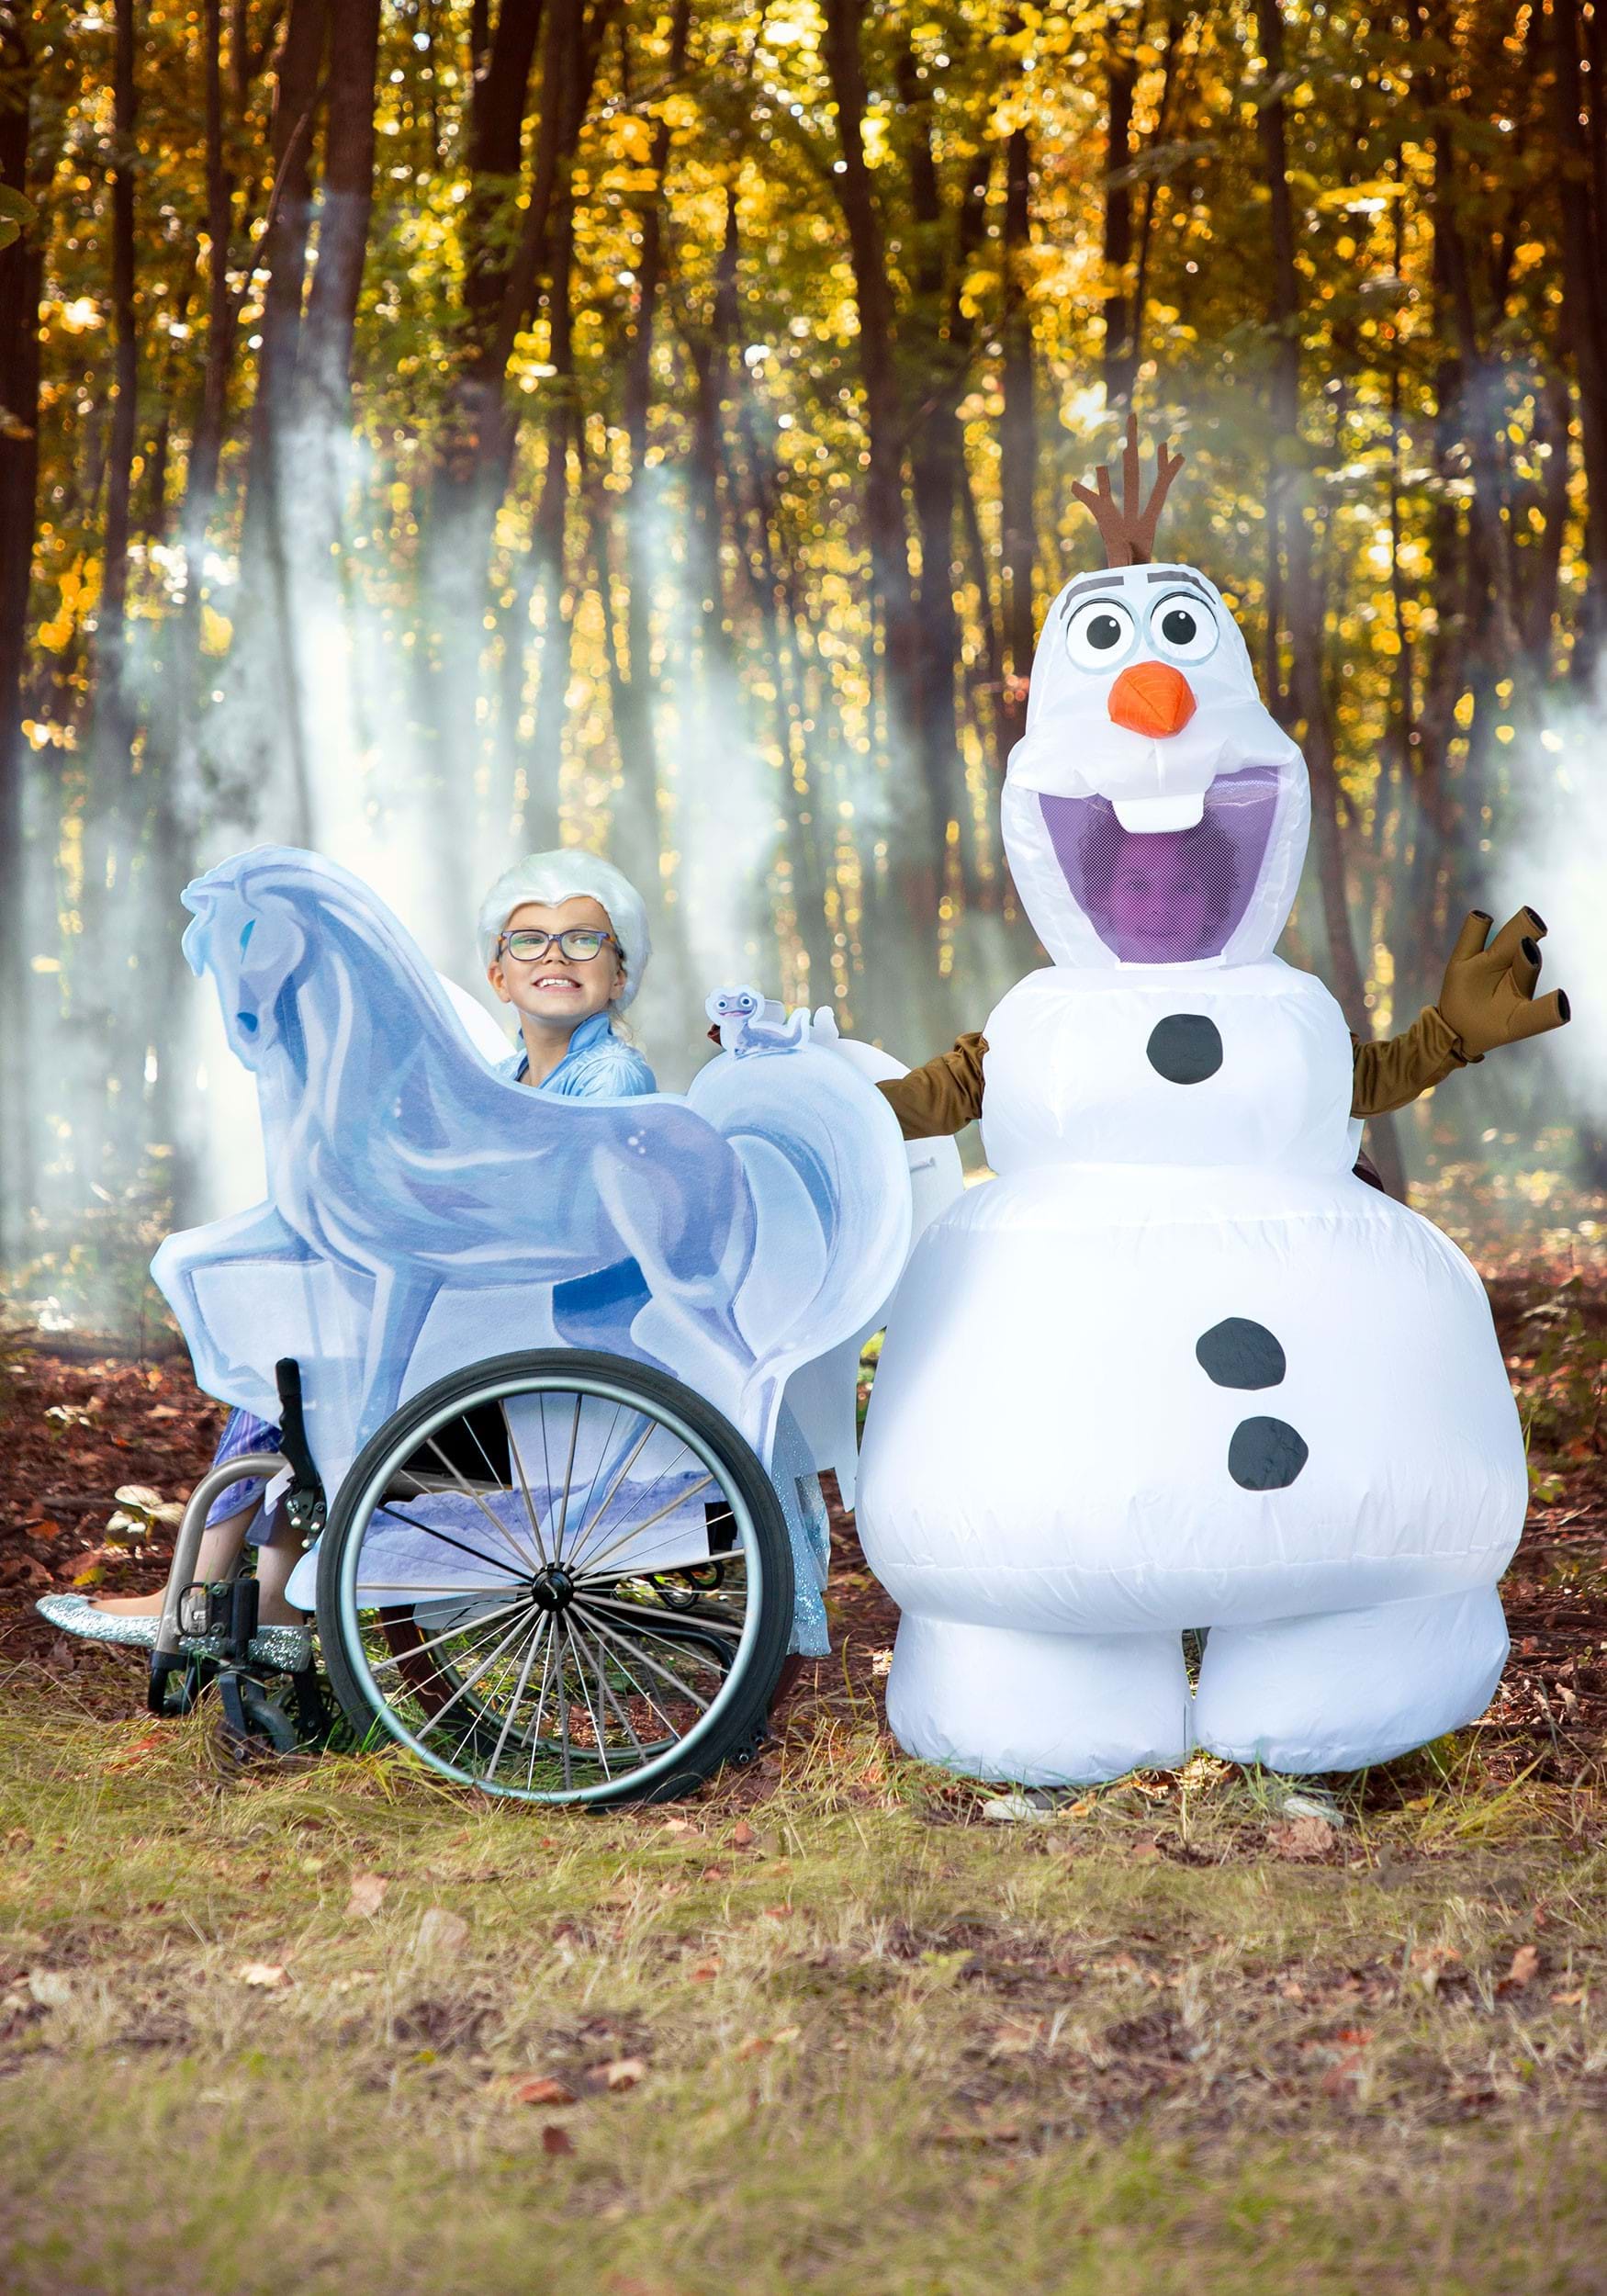 Kids Frozen Olaf Inflatable Costume